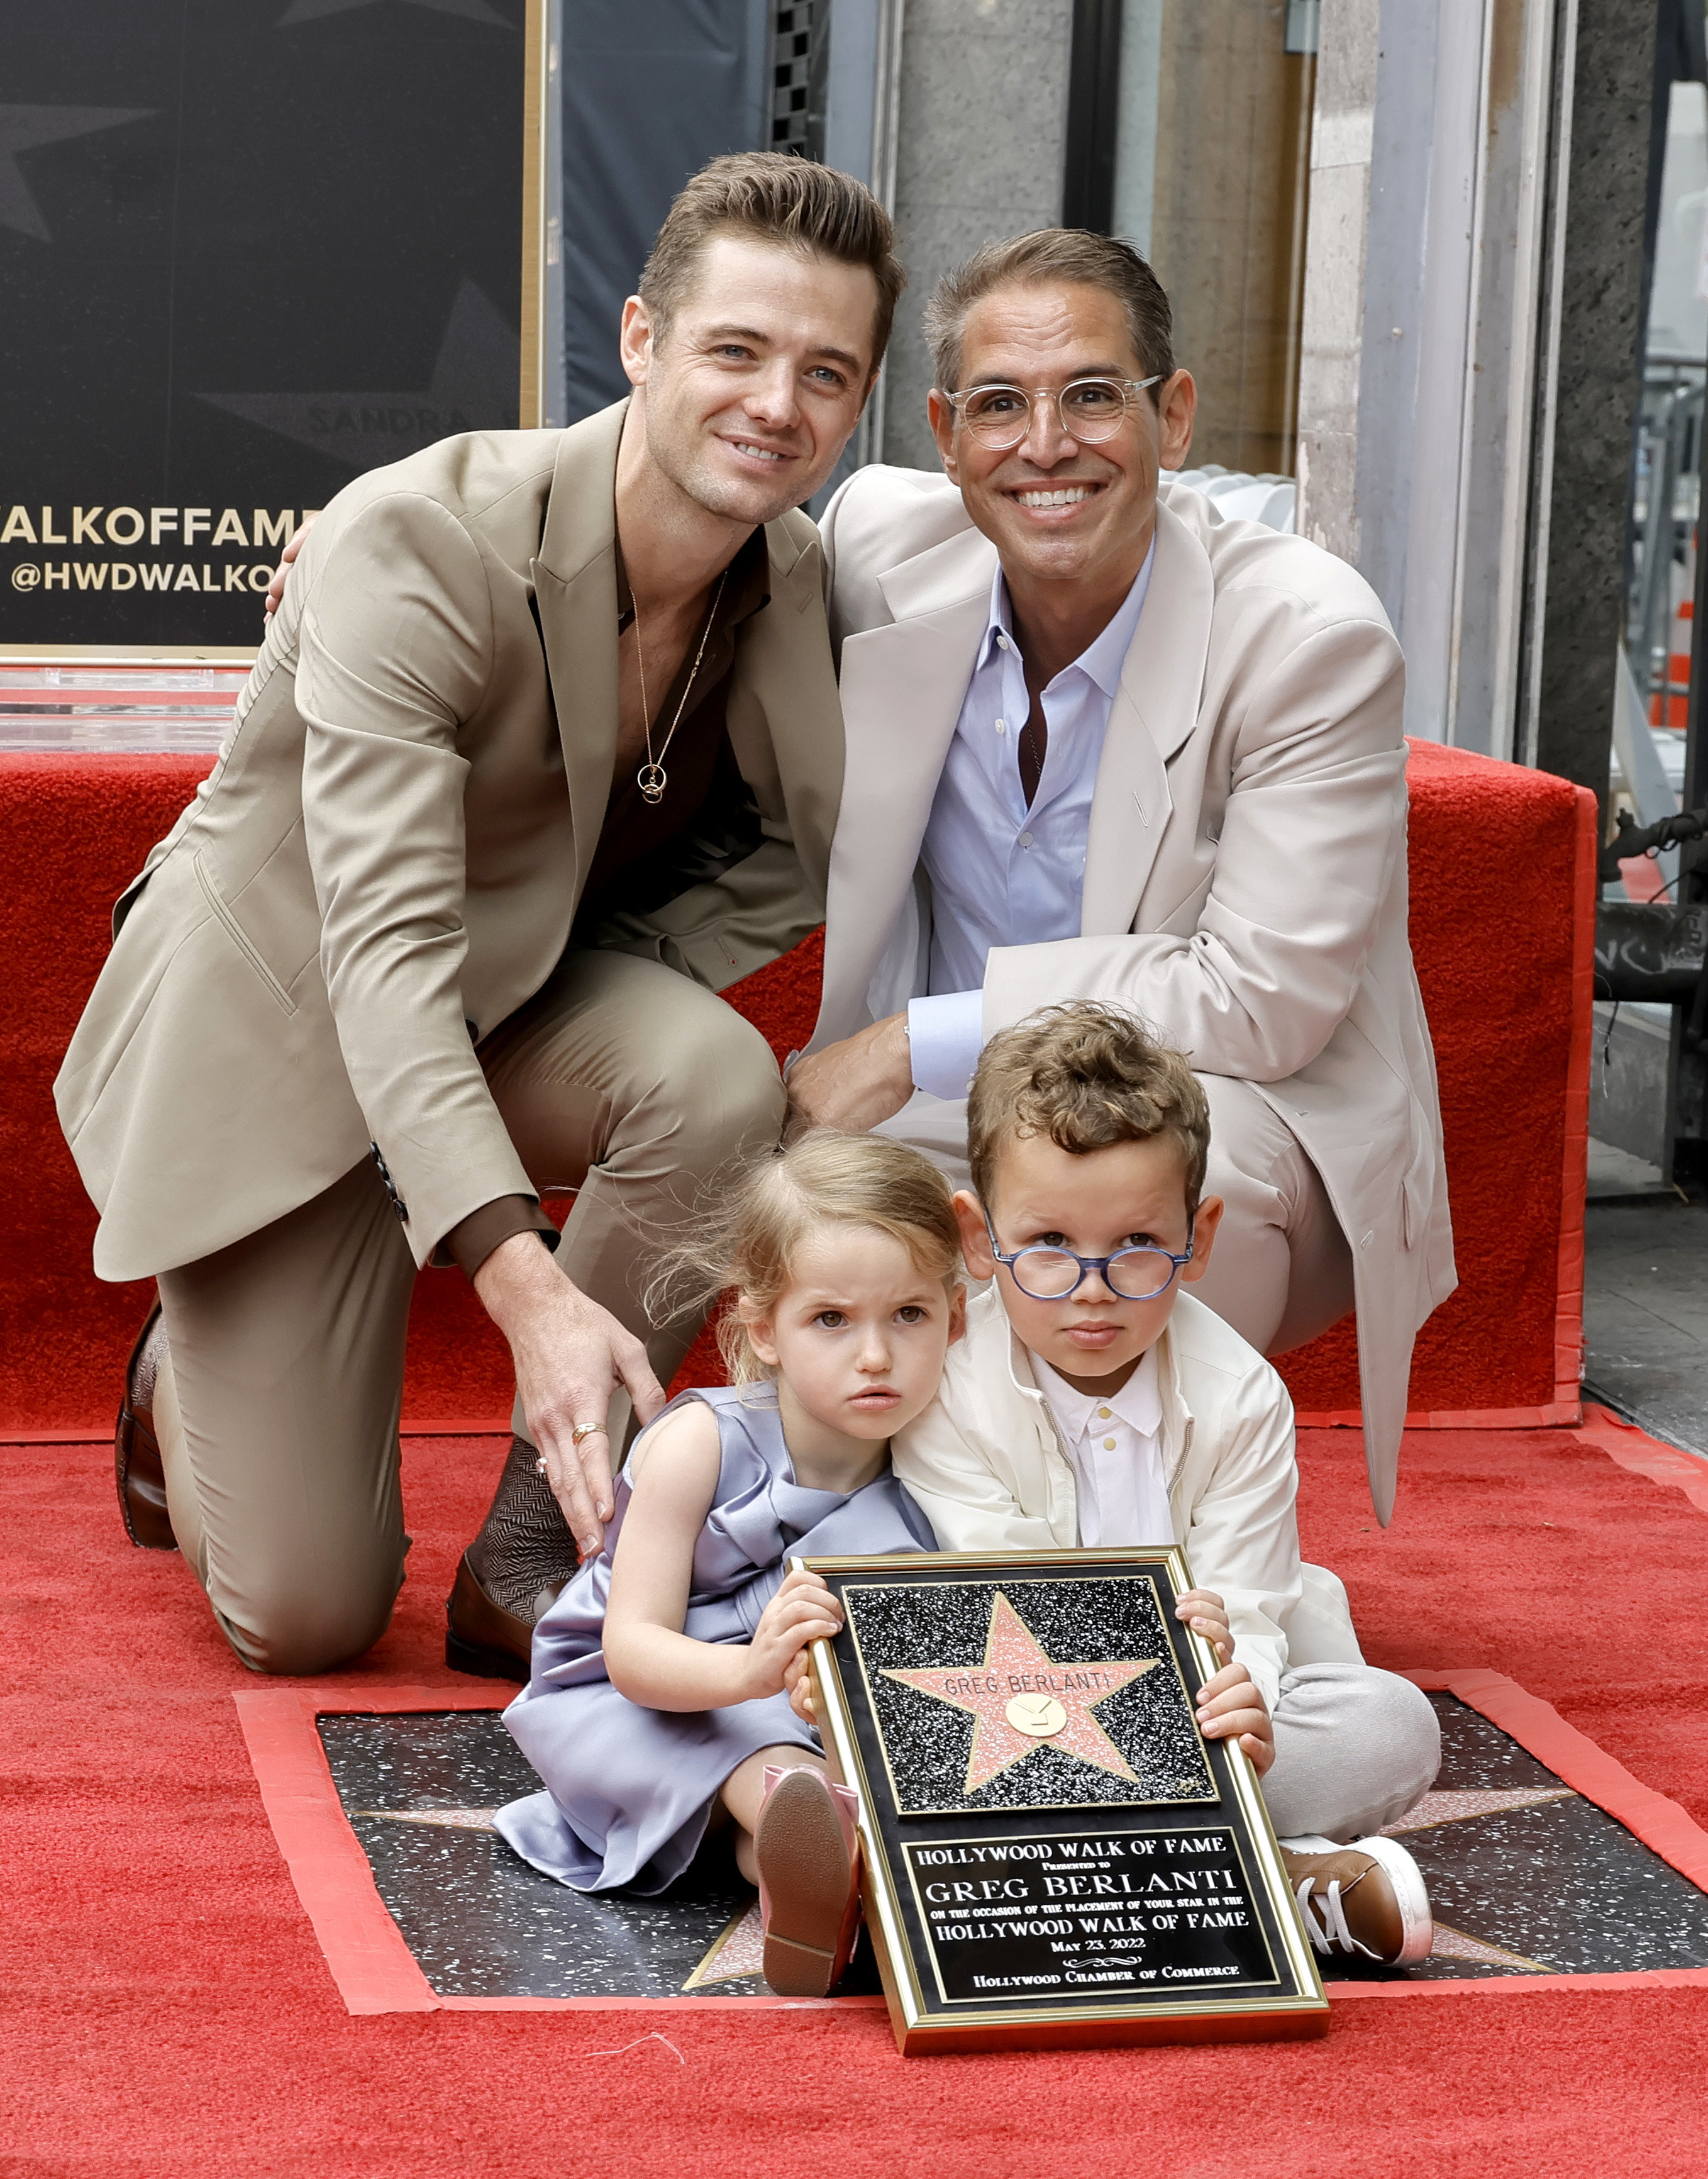 Robbie Rogers, Greg Berlanti, and their two kids